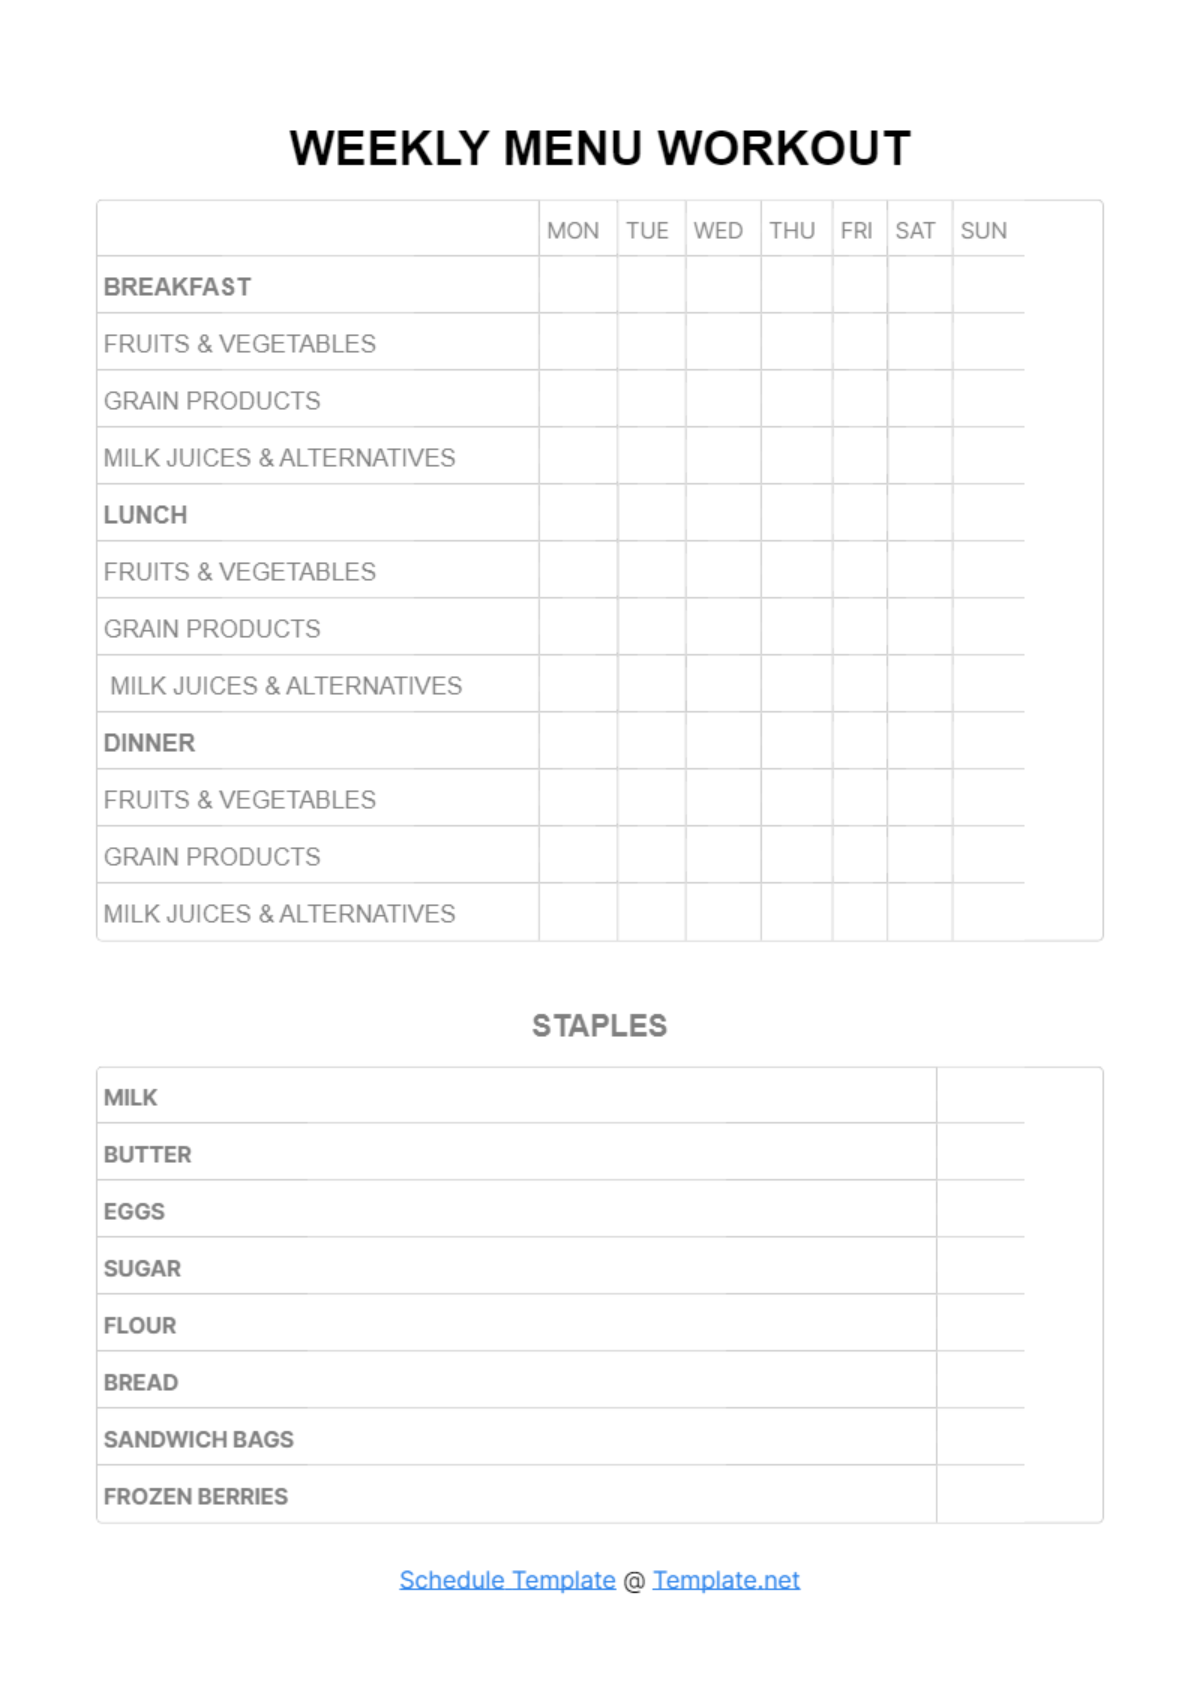 Free Weekly Menu Workout Schedule Template